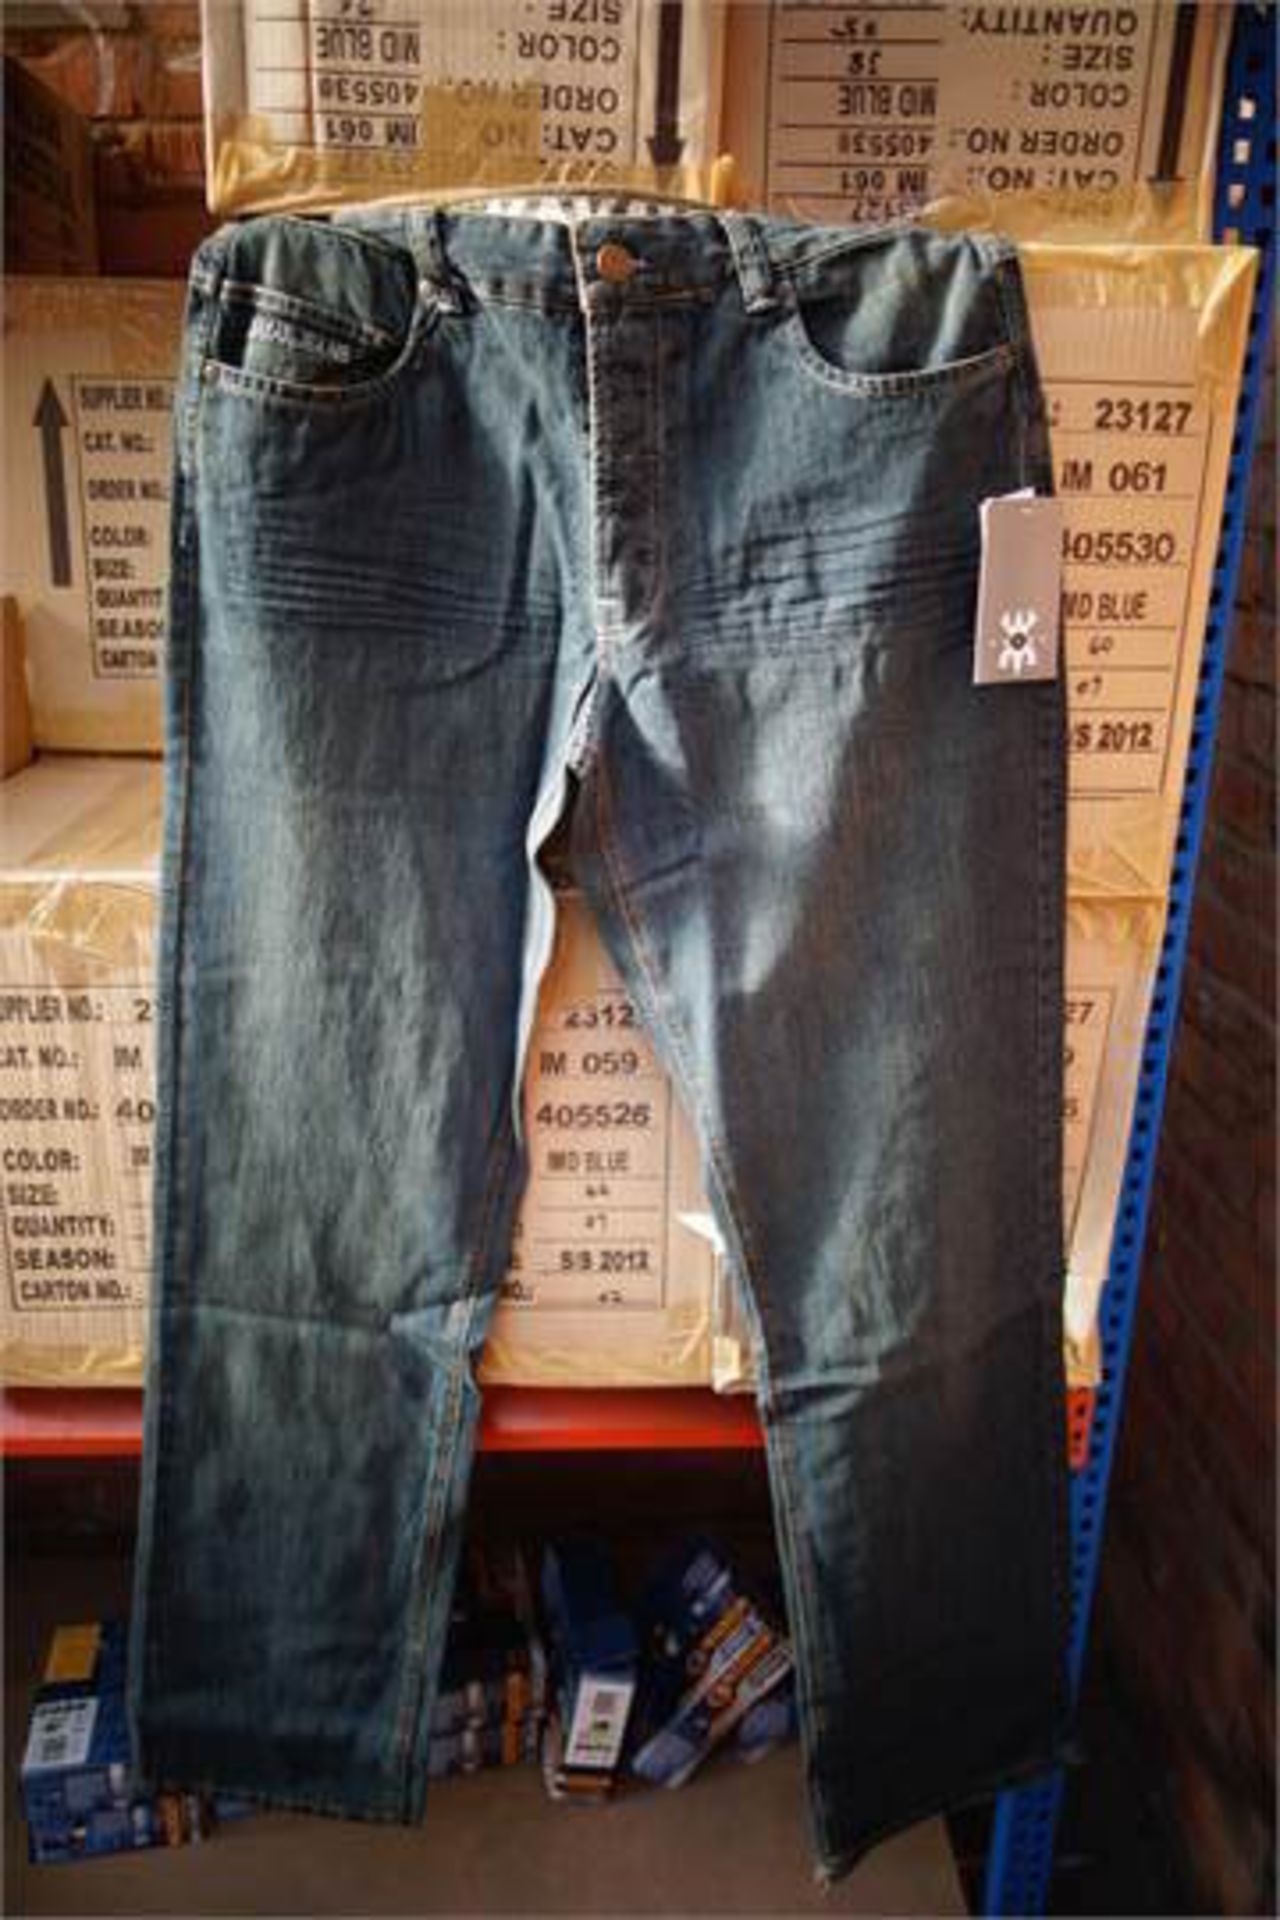 12 x Pairs of Brand New Kayak Denim Jeans. High Quality. Original RRP £40 each, giving this lot a